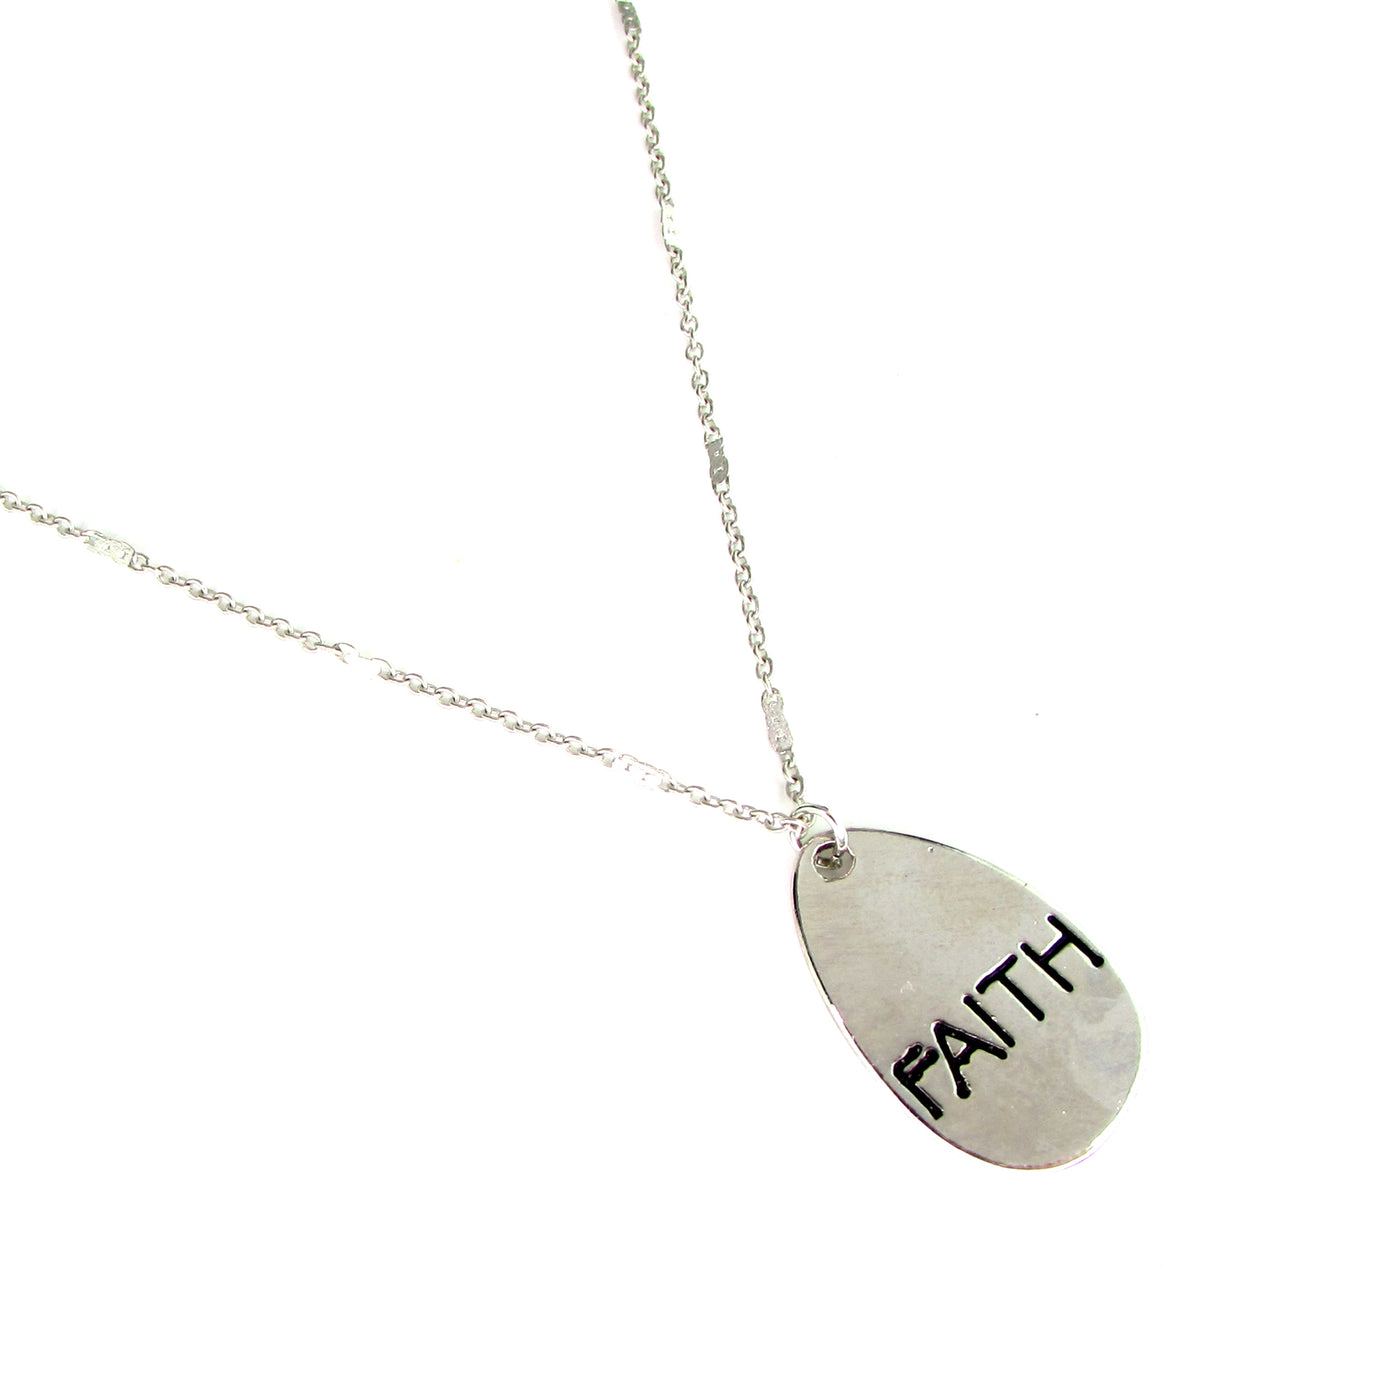 Trust Necklace-Good Work(s) Make A Difference® | Christian and Inspirational Jewelry Company in Vernon, California